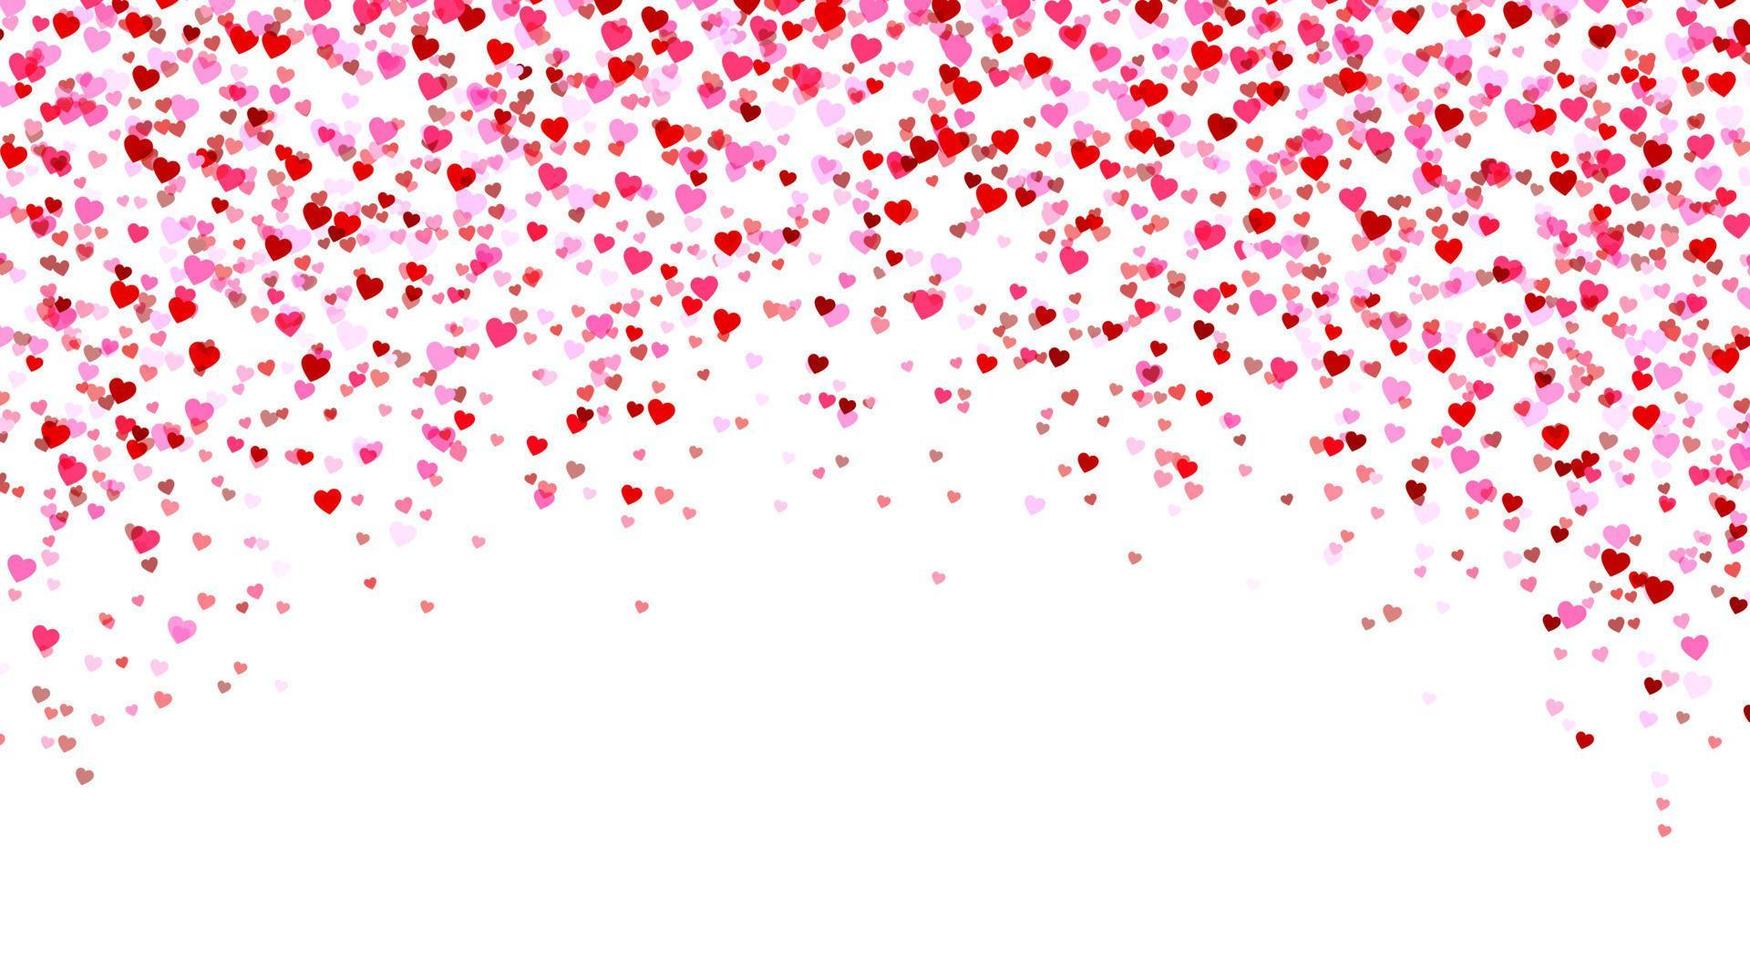 Red and pink heart confetti isolated on white background. Falling heart confetti background. Valentine's day, wedding or celebration design element vector